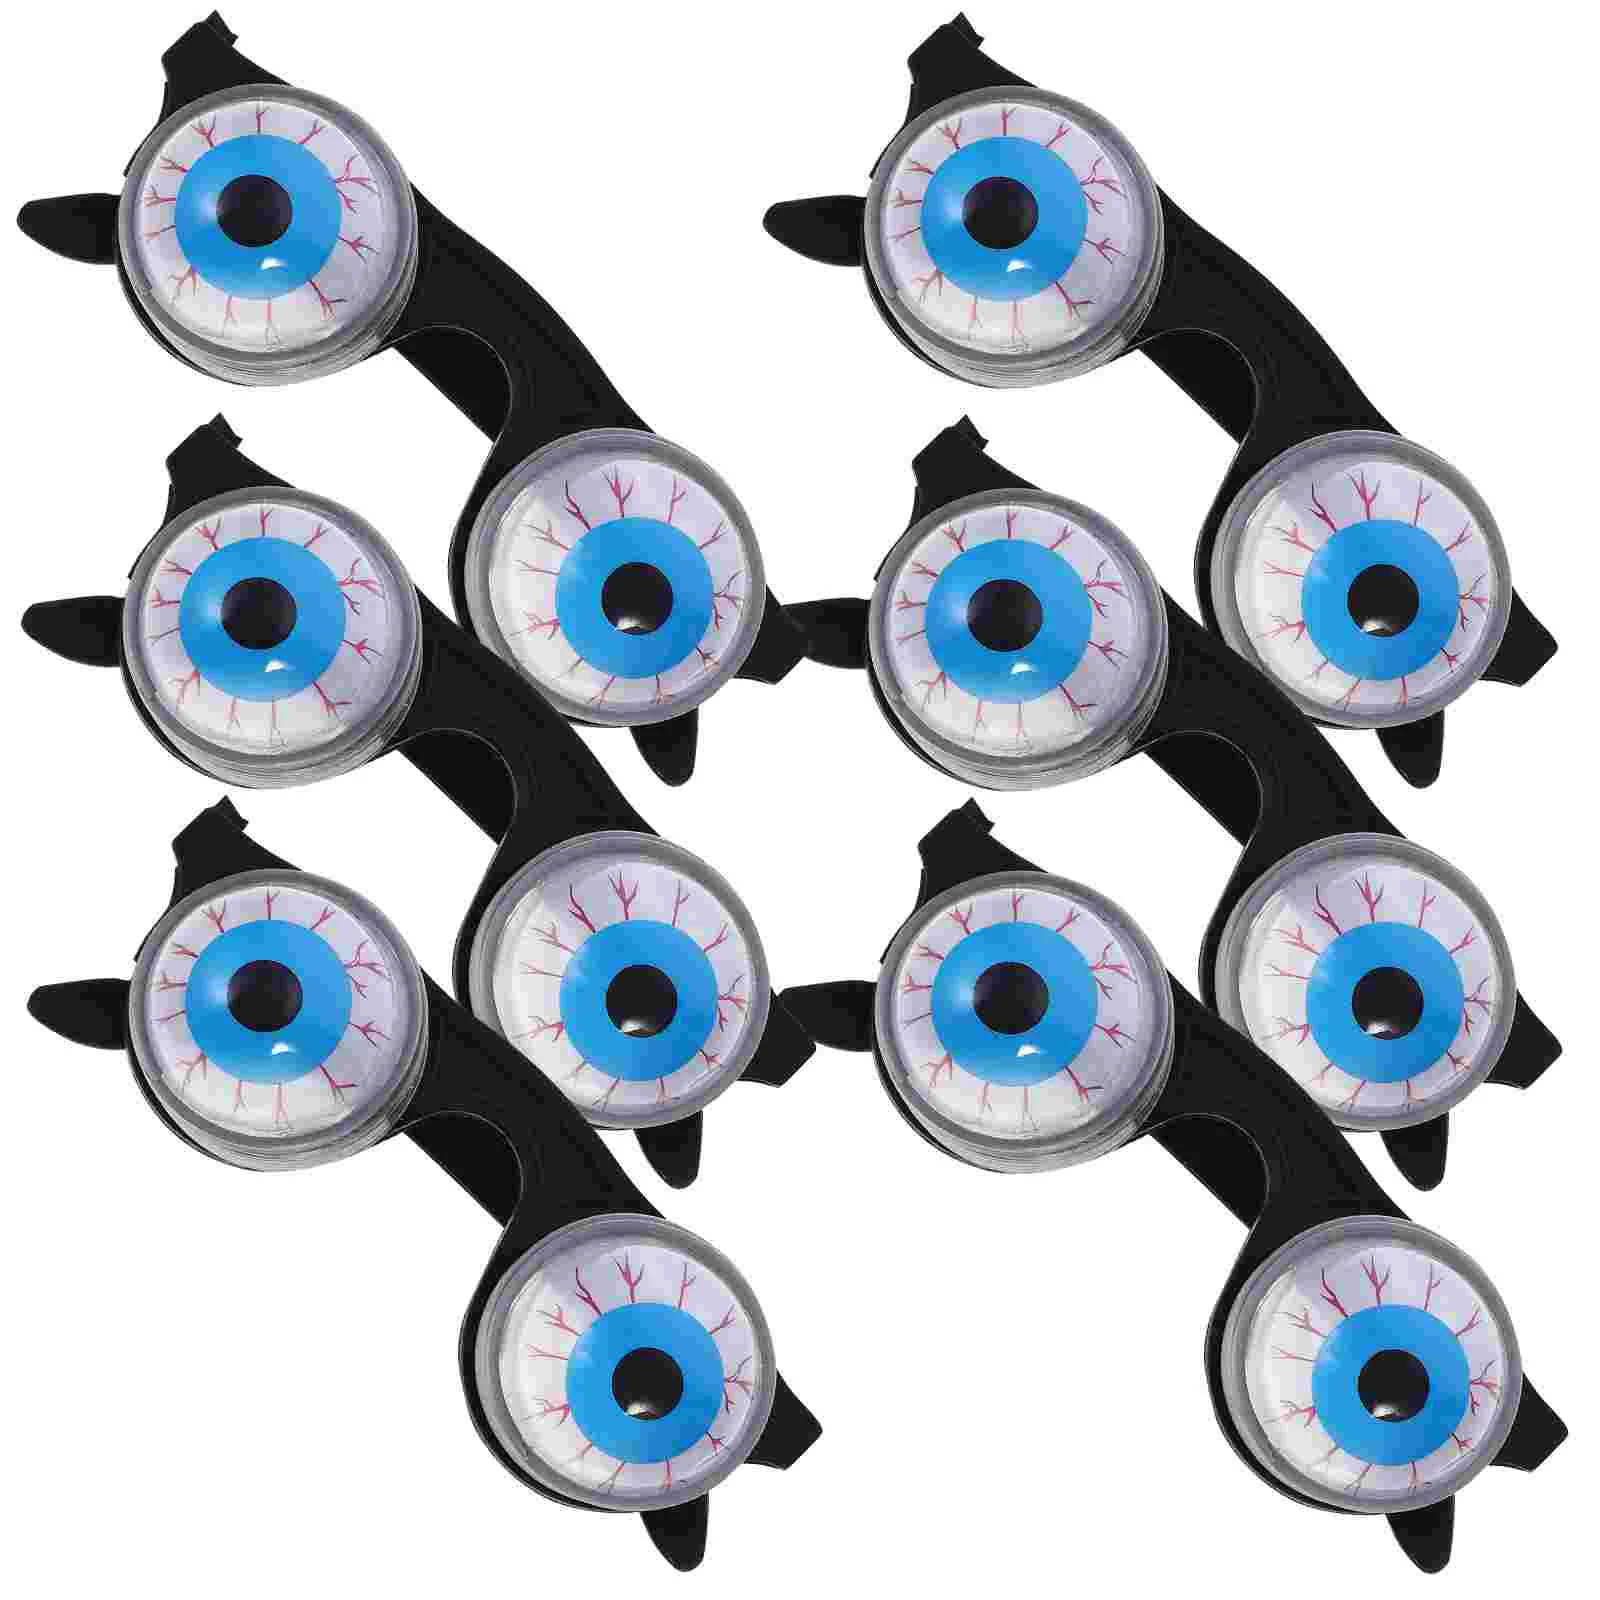 

6pcs Eyeball Glasses Funny Goo Goo Eye Spring Disguise Glasses Gag Prop Gifts Tricky For Themed Party Goodie Bag Stuffer